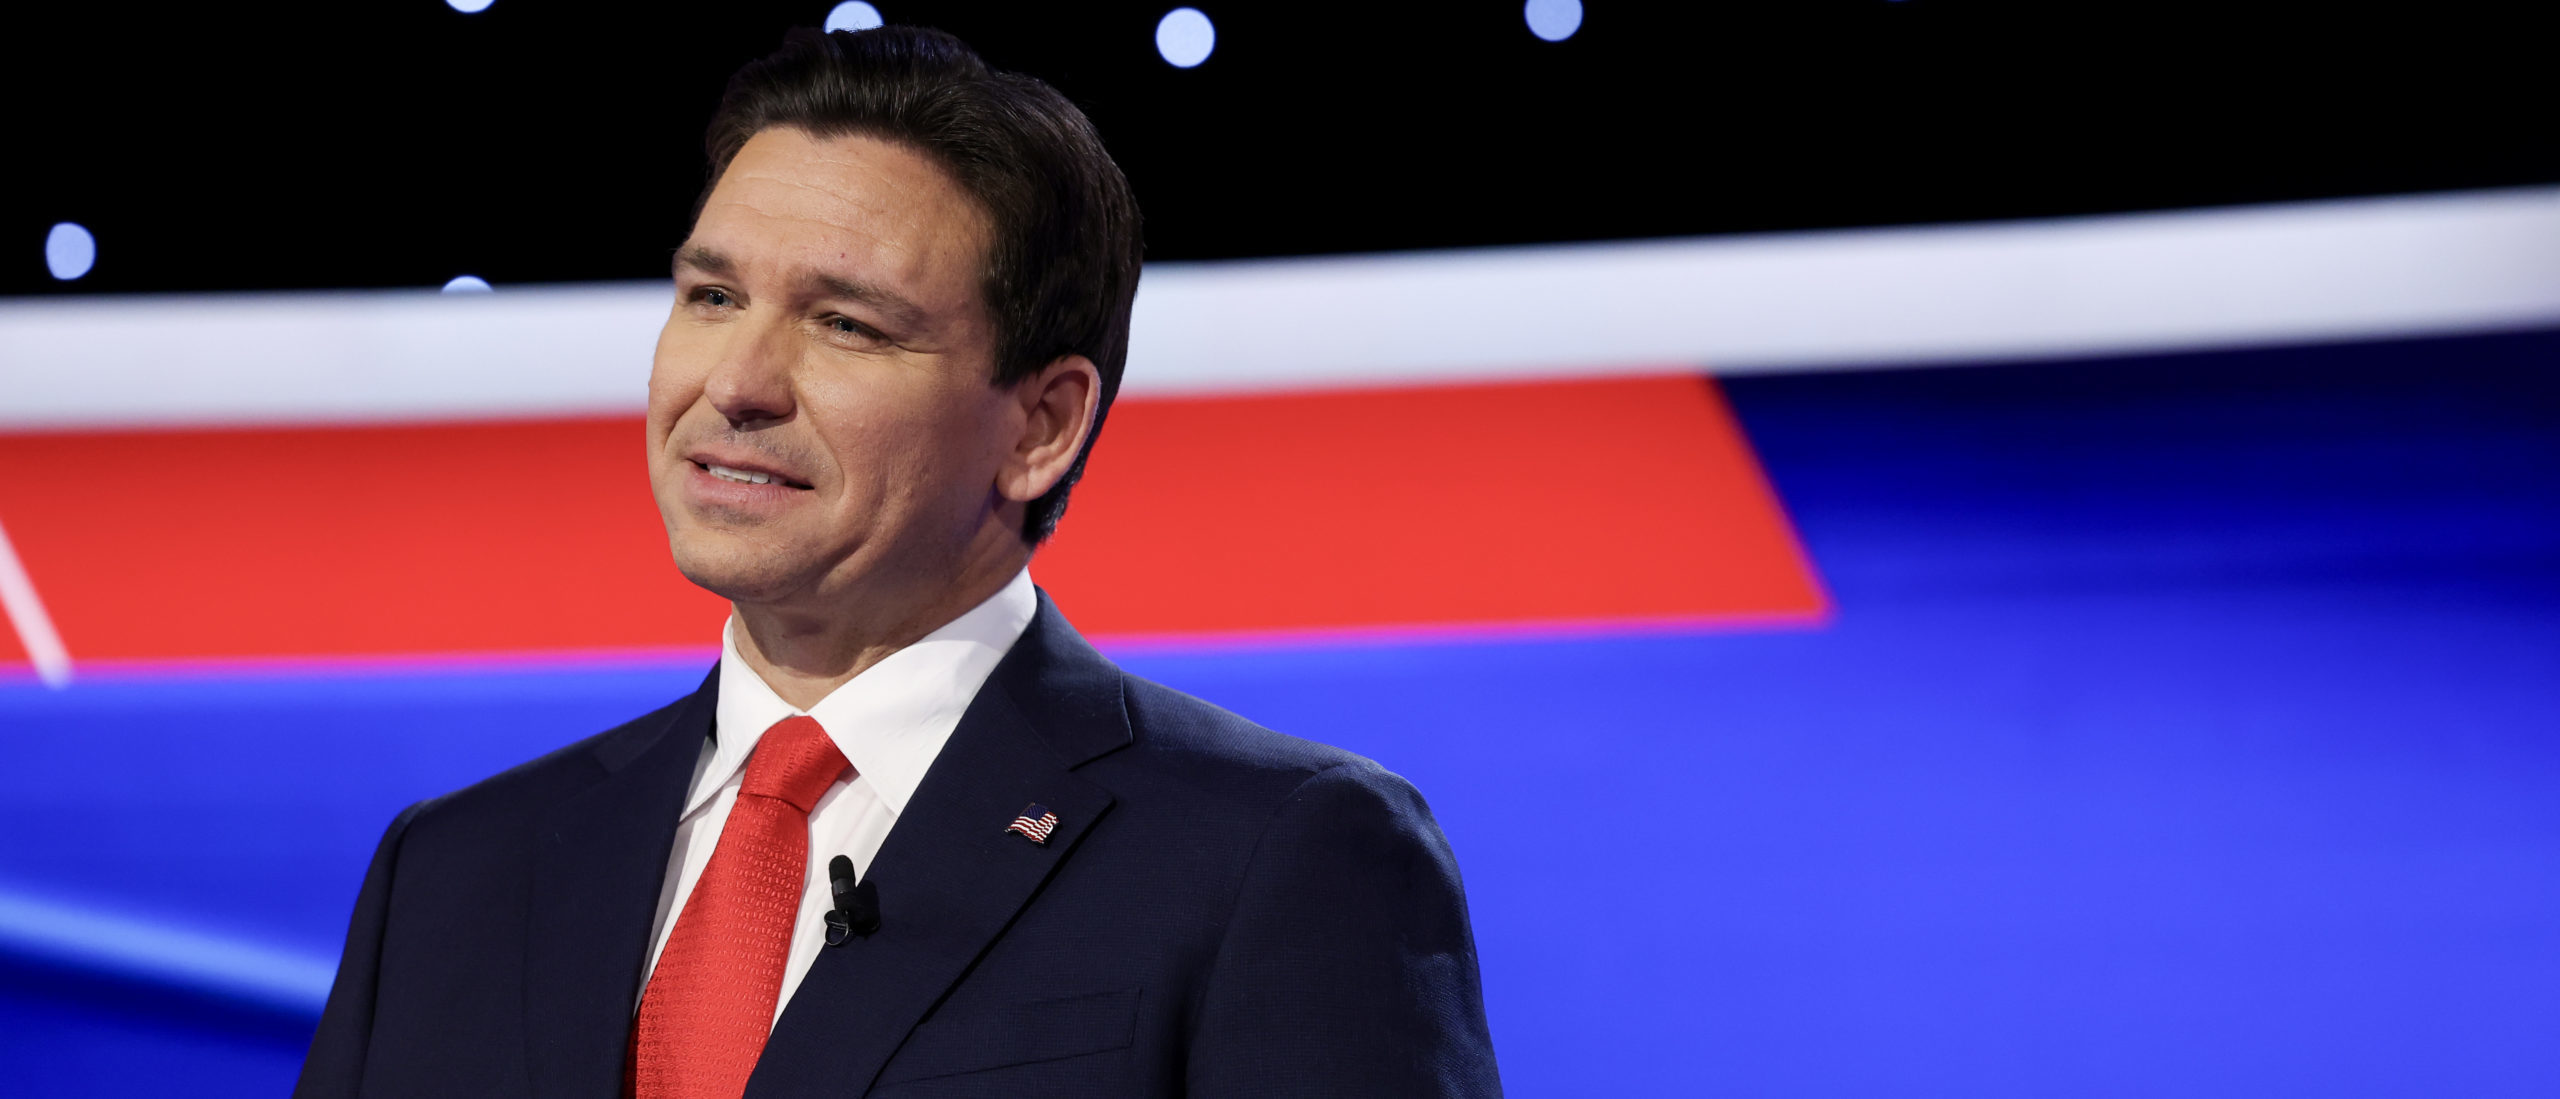 Leaks, Loyalists And One Big Loss: Insiders Describe What Doomed DeSantis From The Start